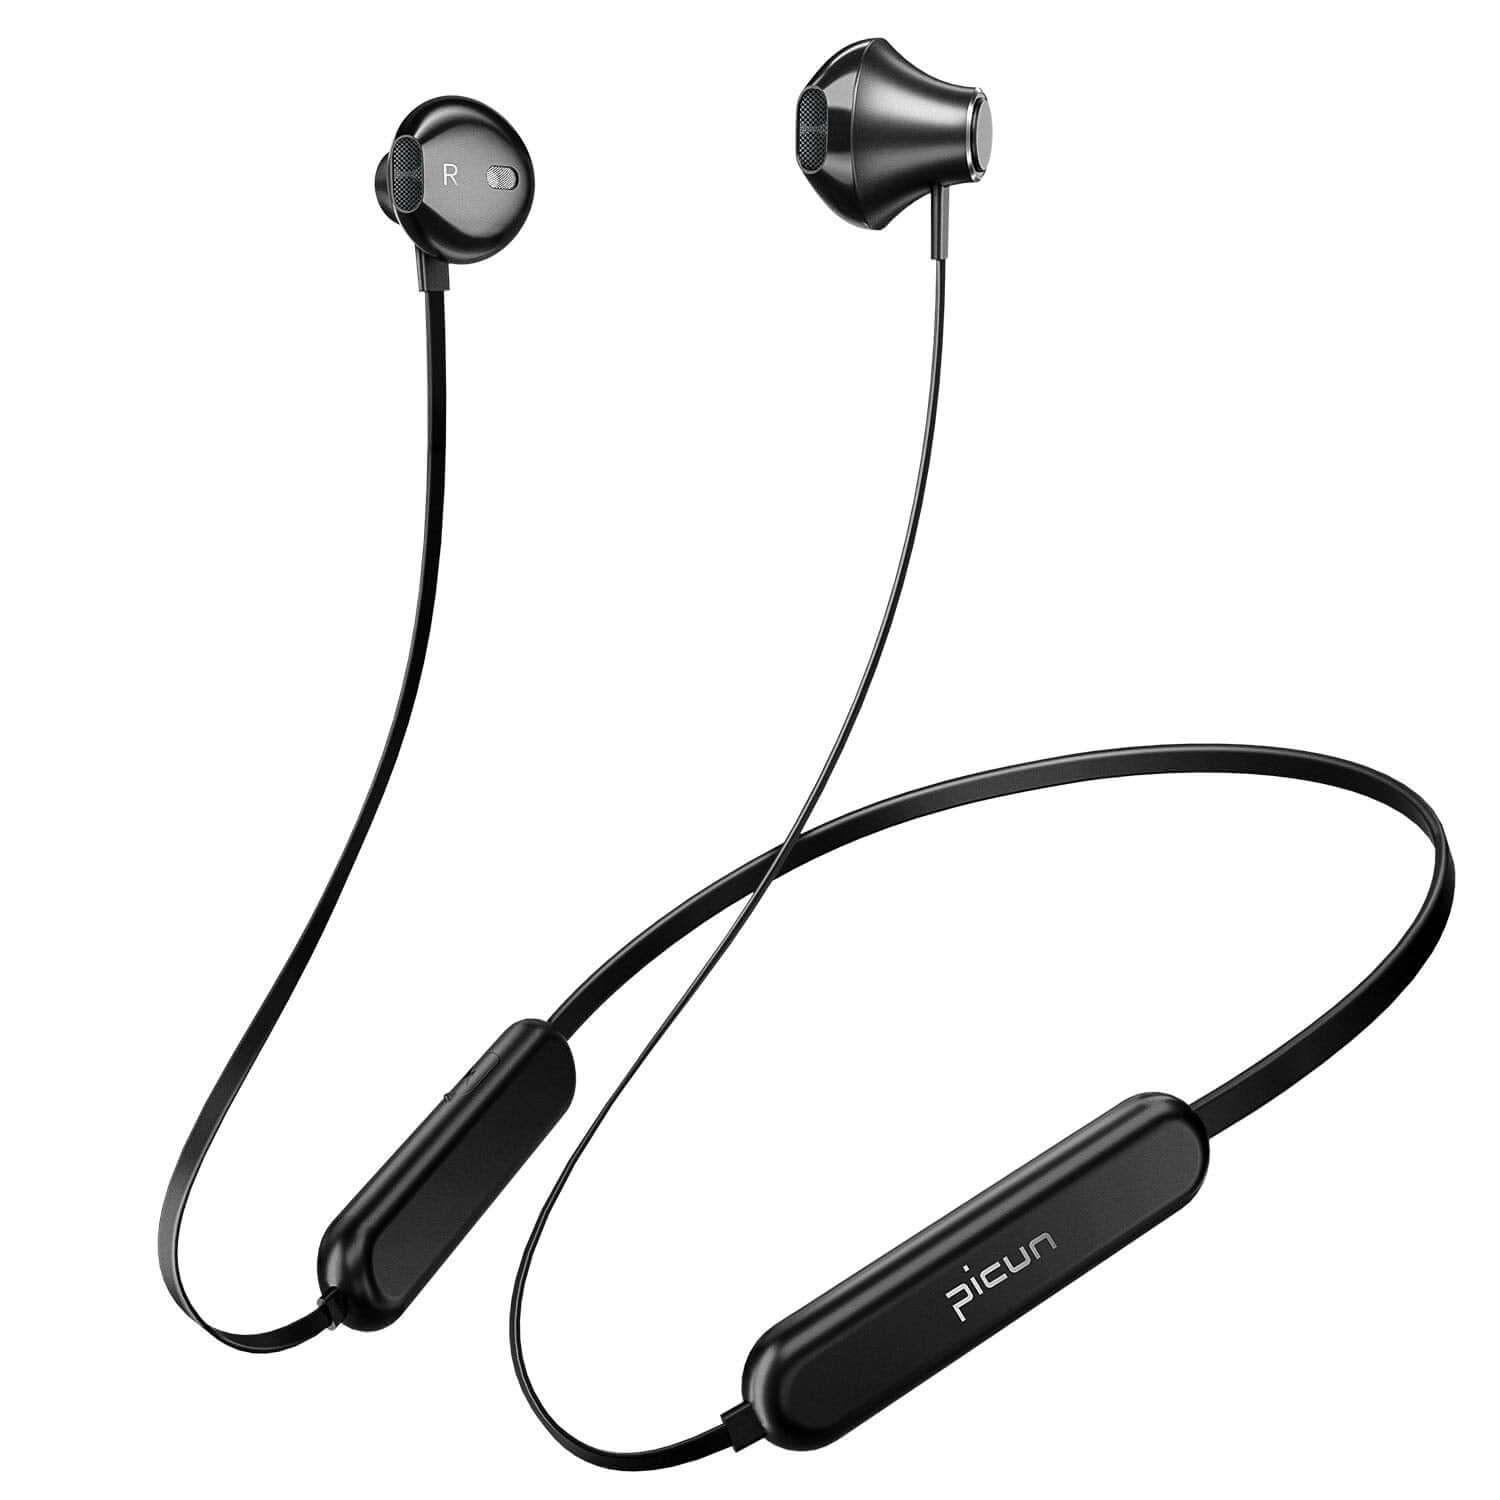 In Ear Wireless Earphones Neckband Magnetic Bluetooth 5.0 with Mic Sport Gym